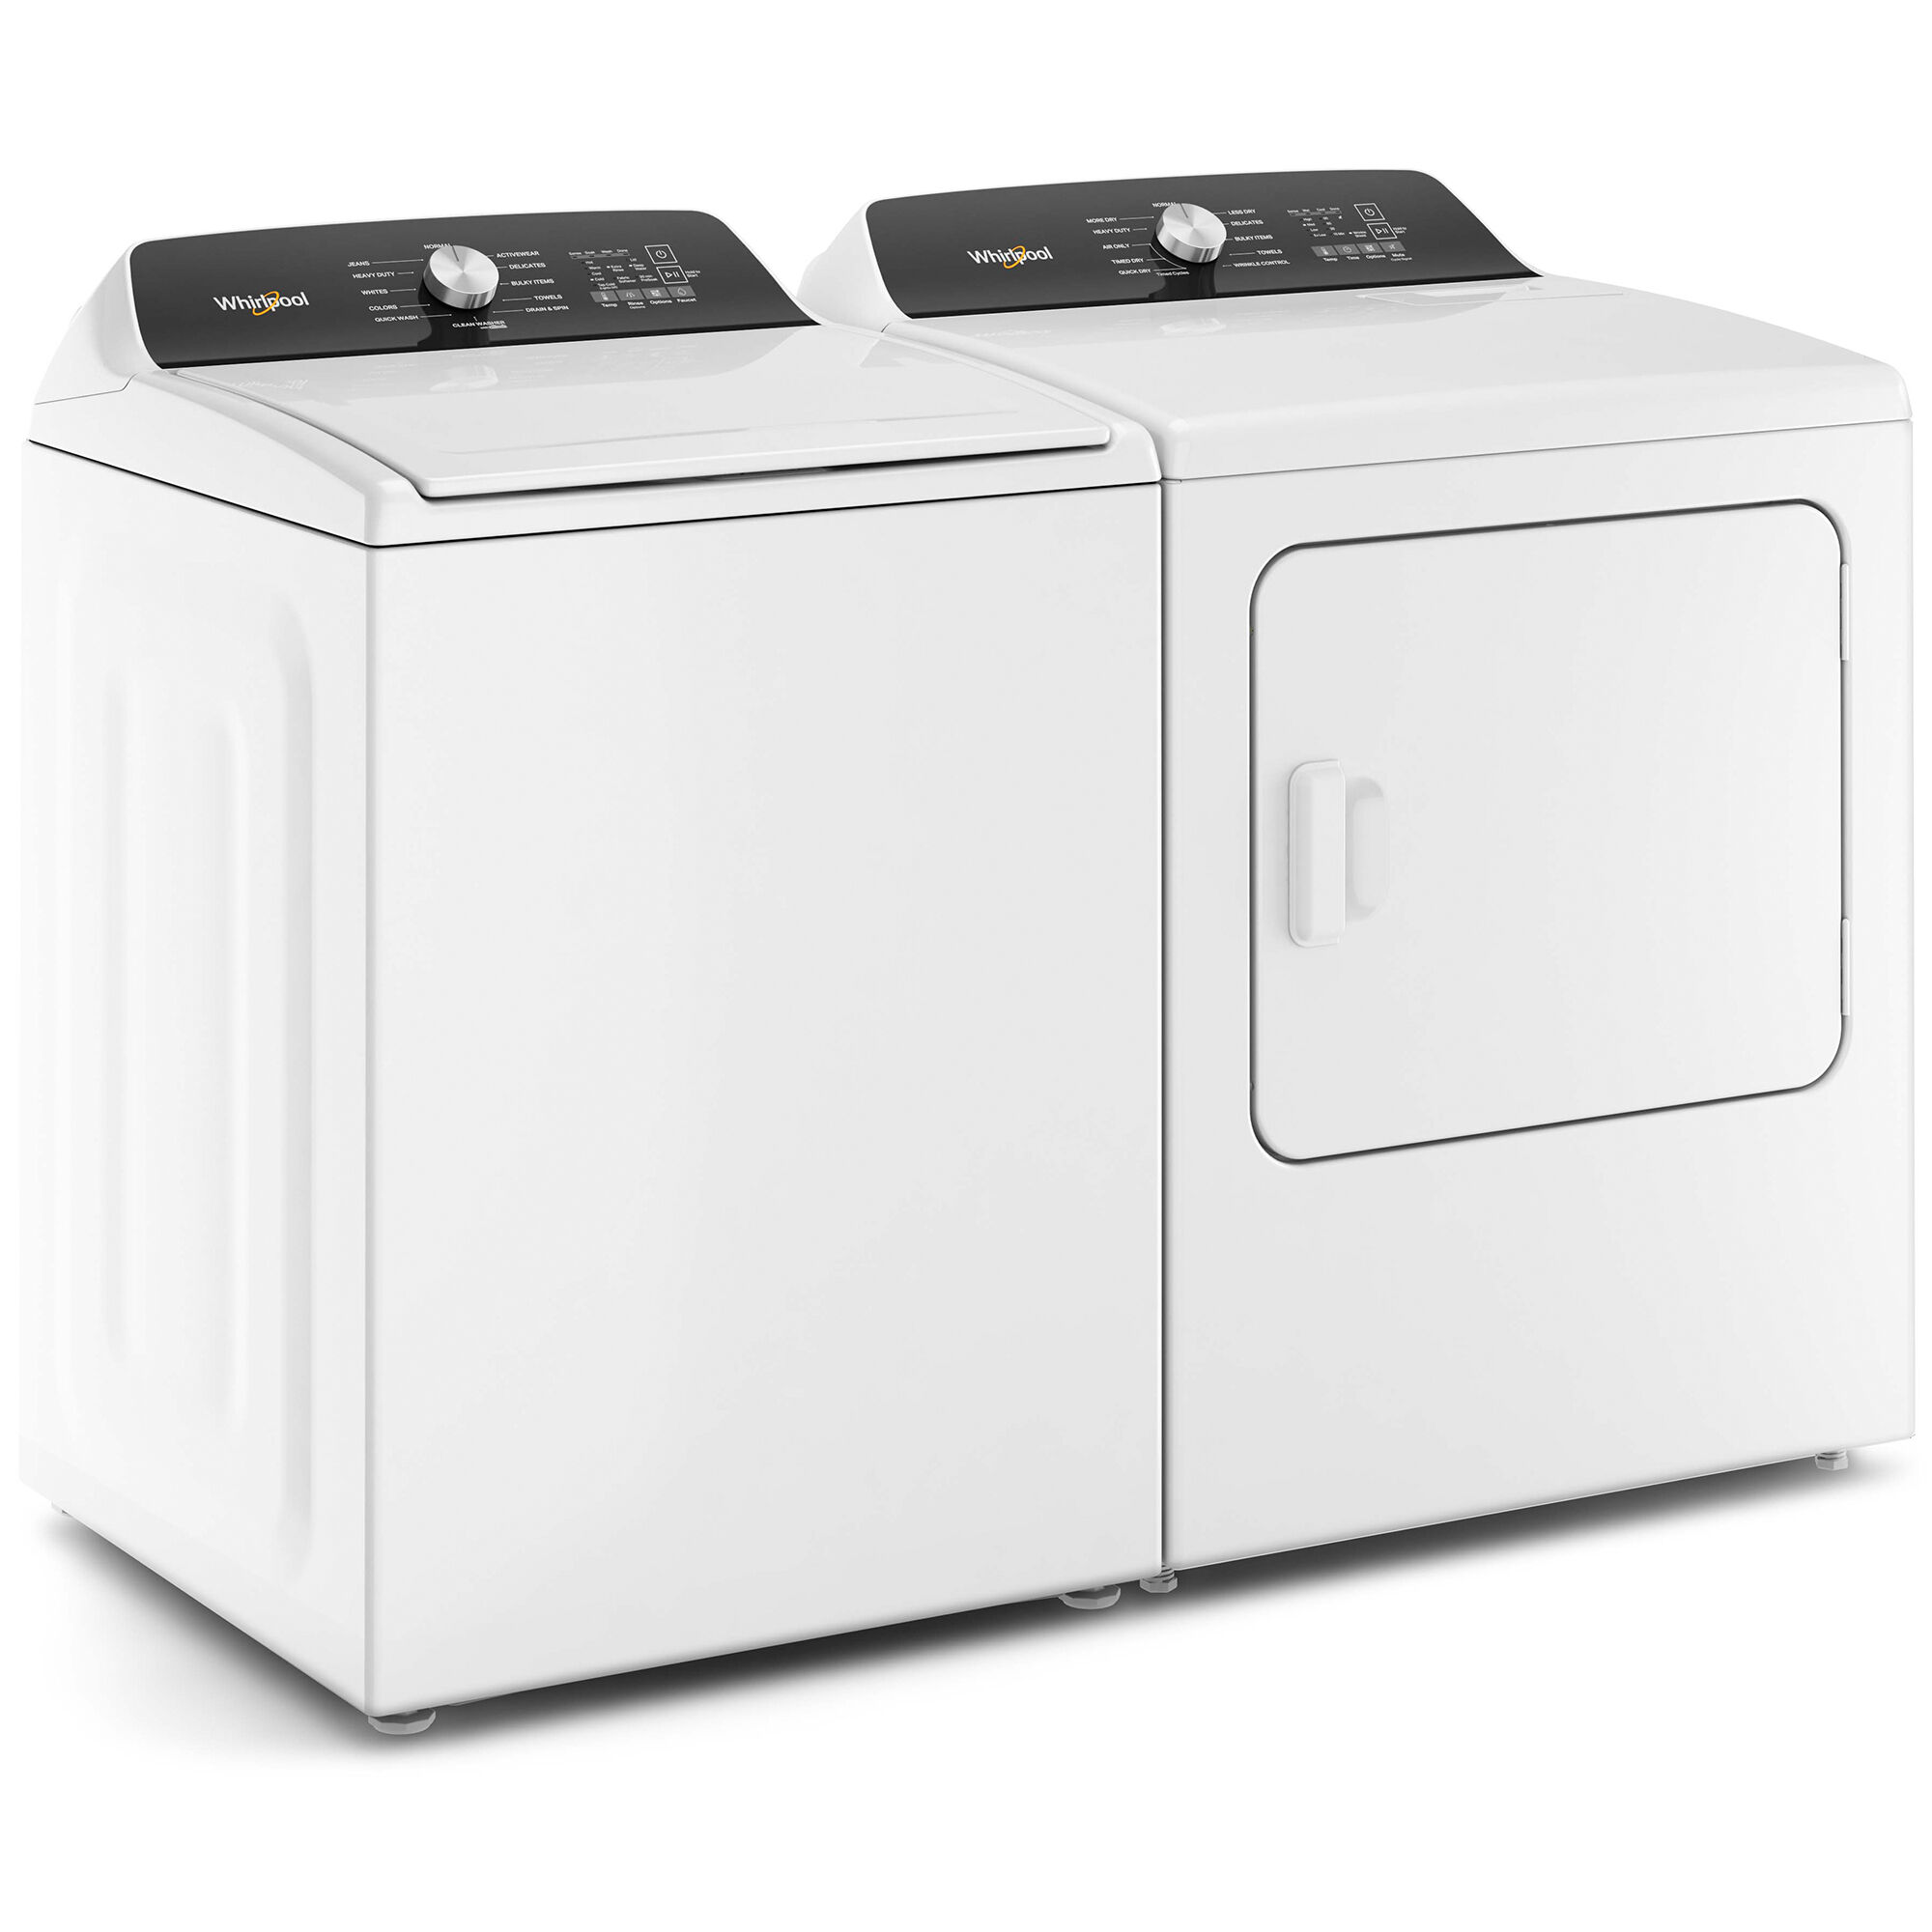 Whirlpool 27.75 in. 4.6 cu. ft. Top Load Washer with Built-in Faucet - White